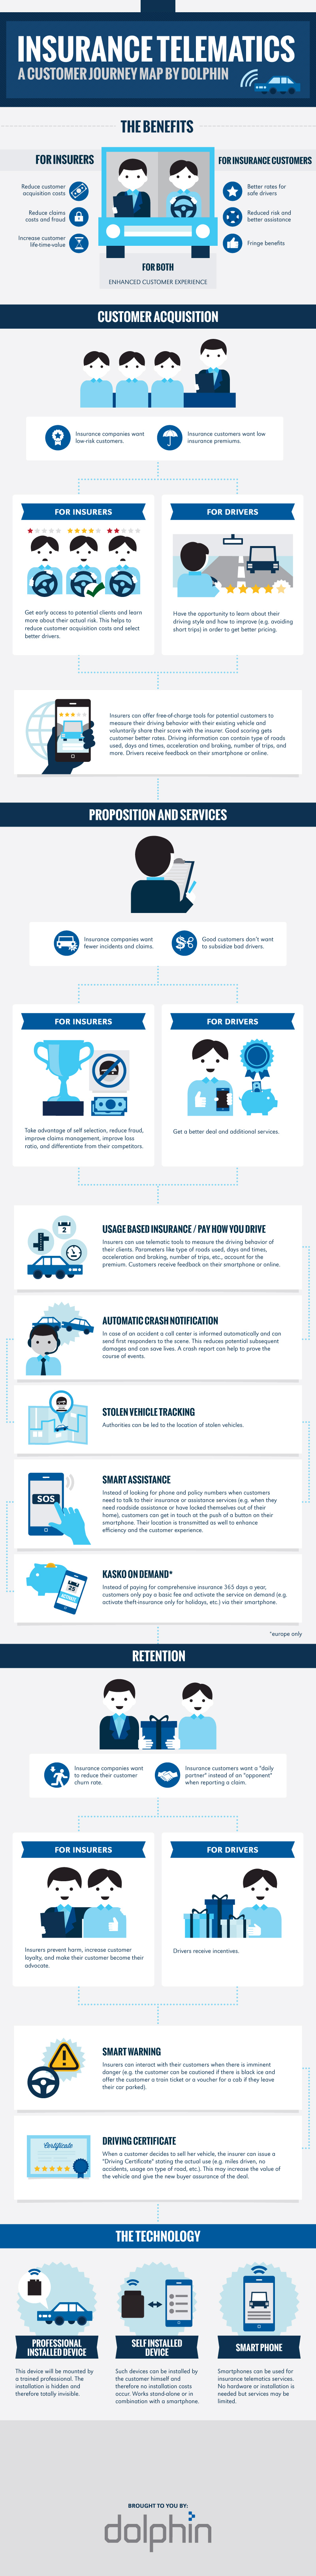 Infographic for Insurance Telematics Infographic